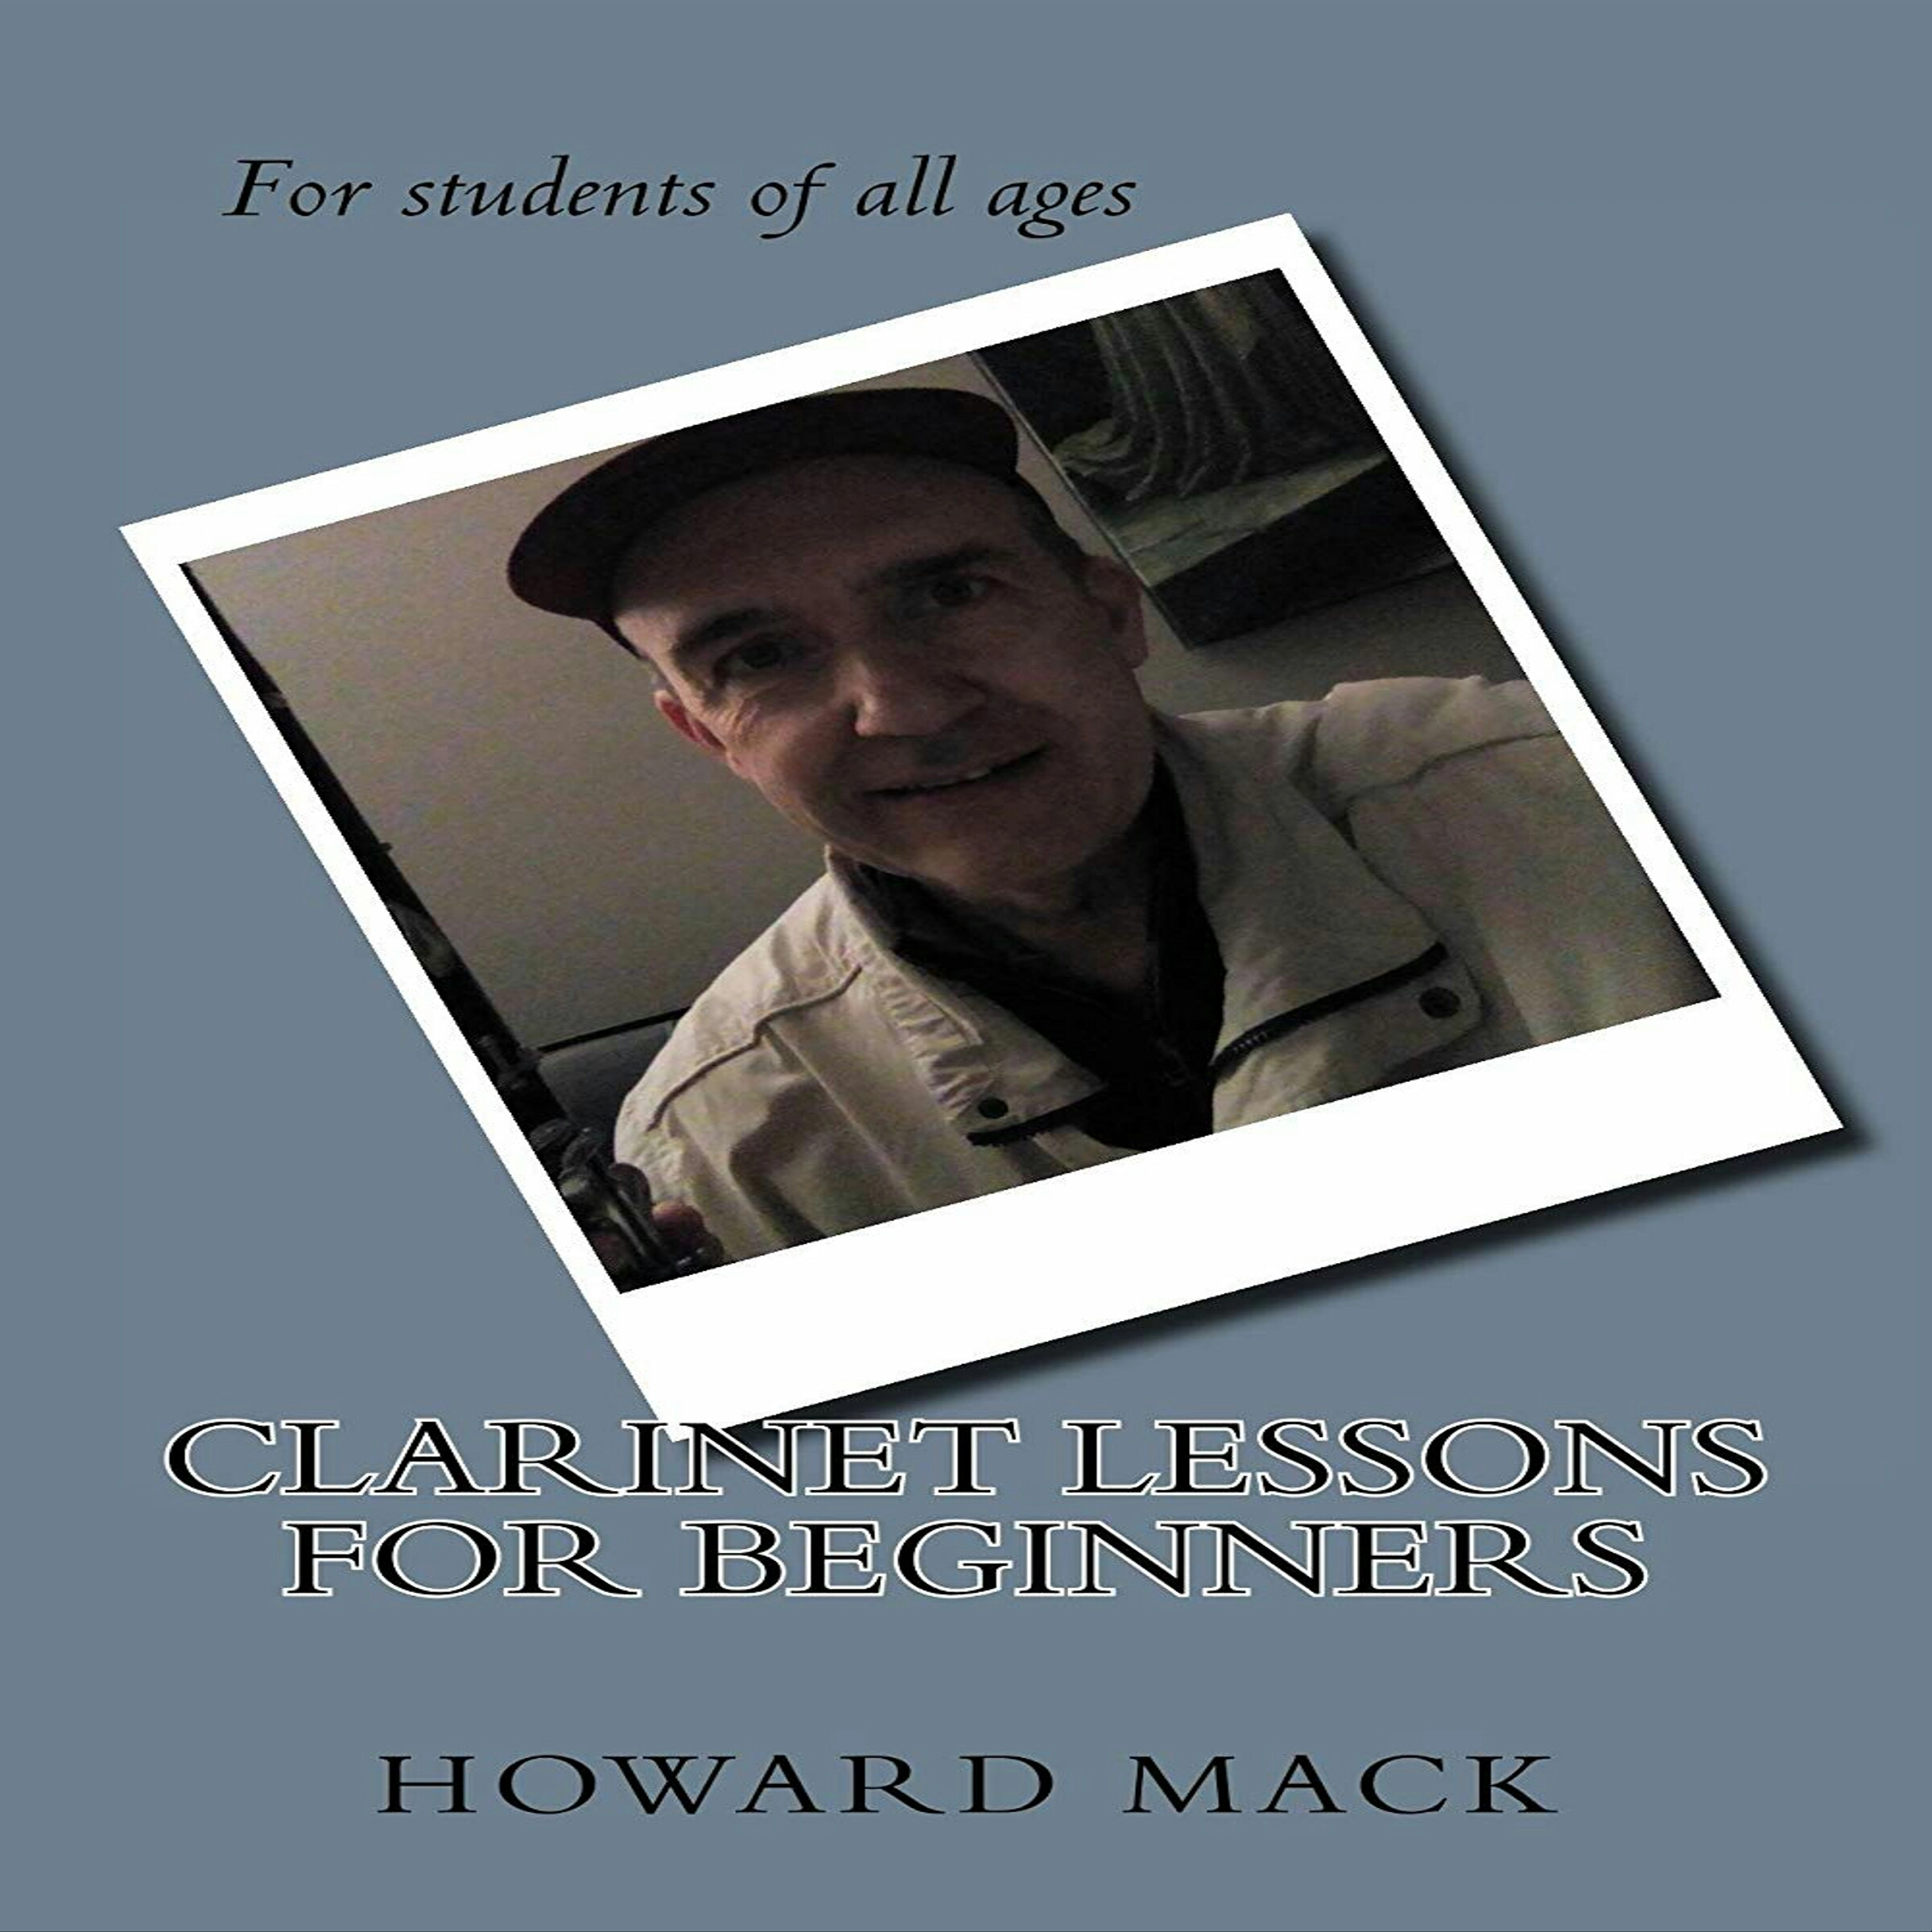 Clarinet Lessons for Beginners Audiobook by Howard Mack